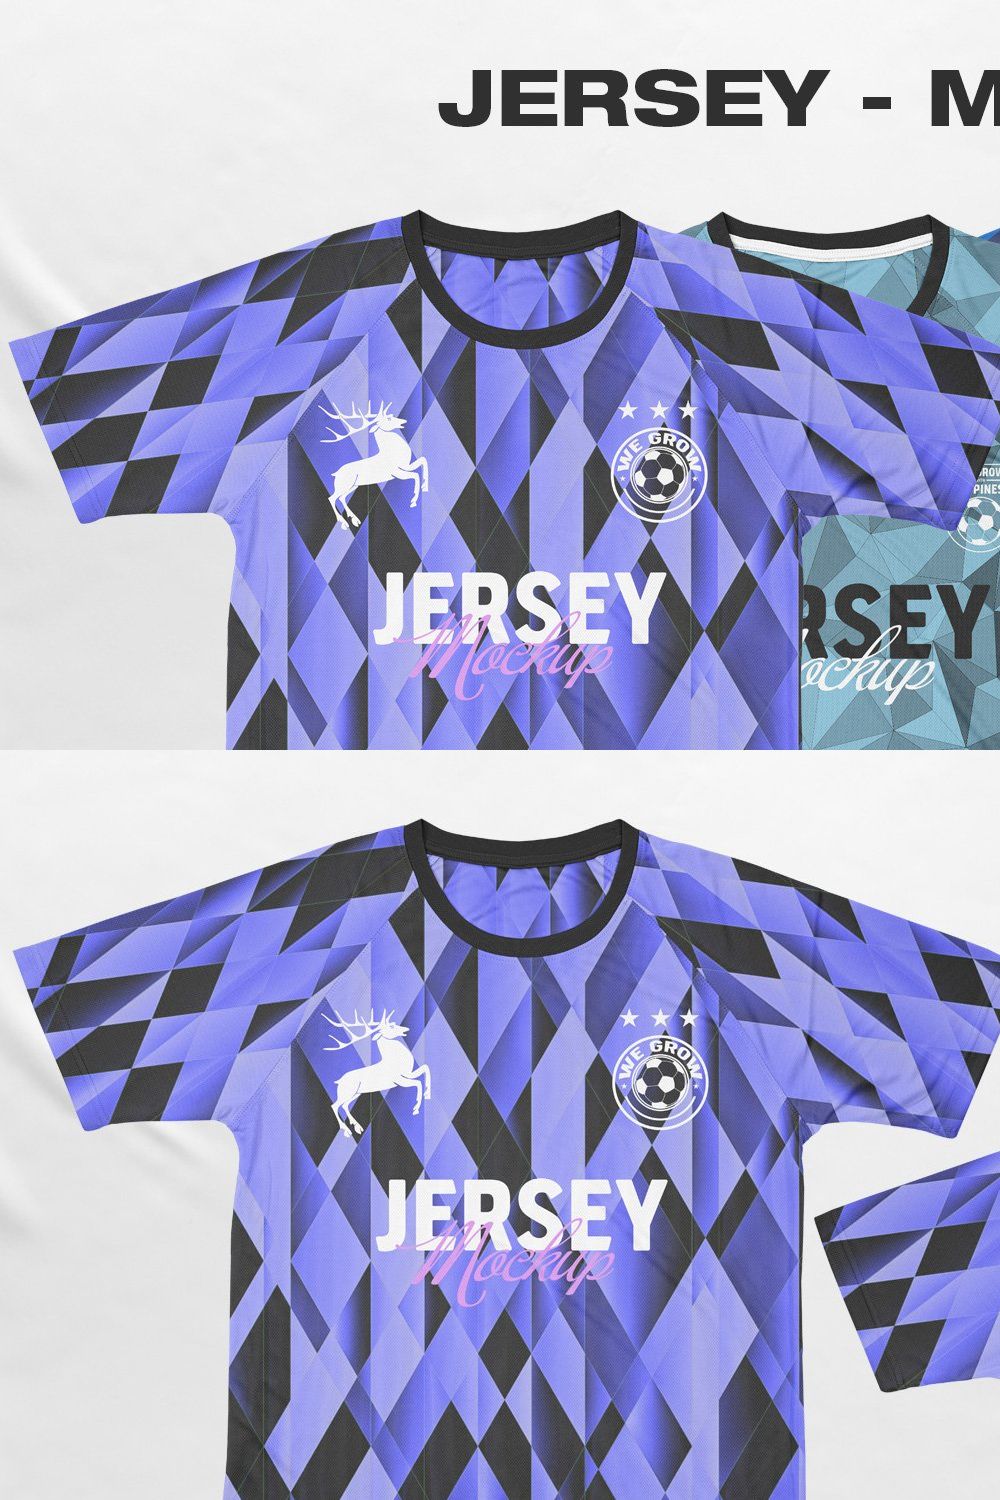 Jersey - Mockup pinterest preview image.